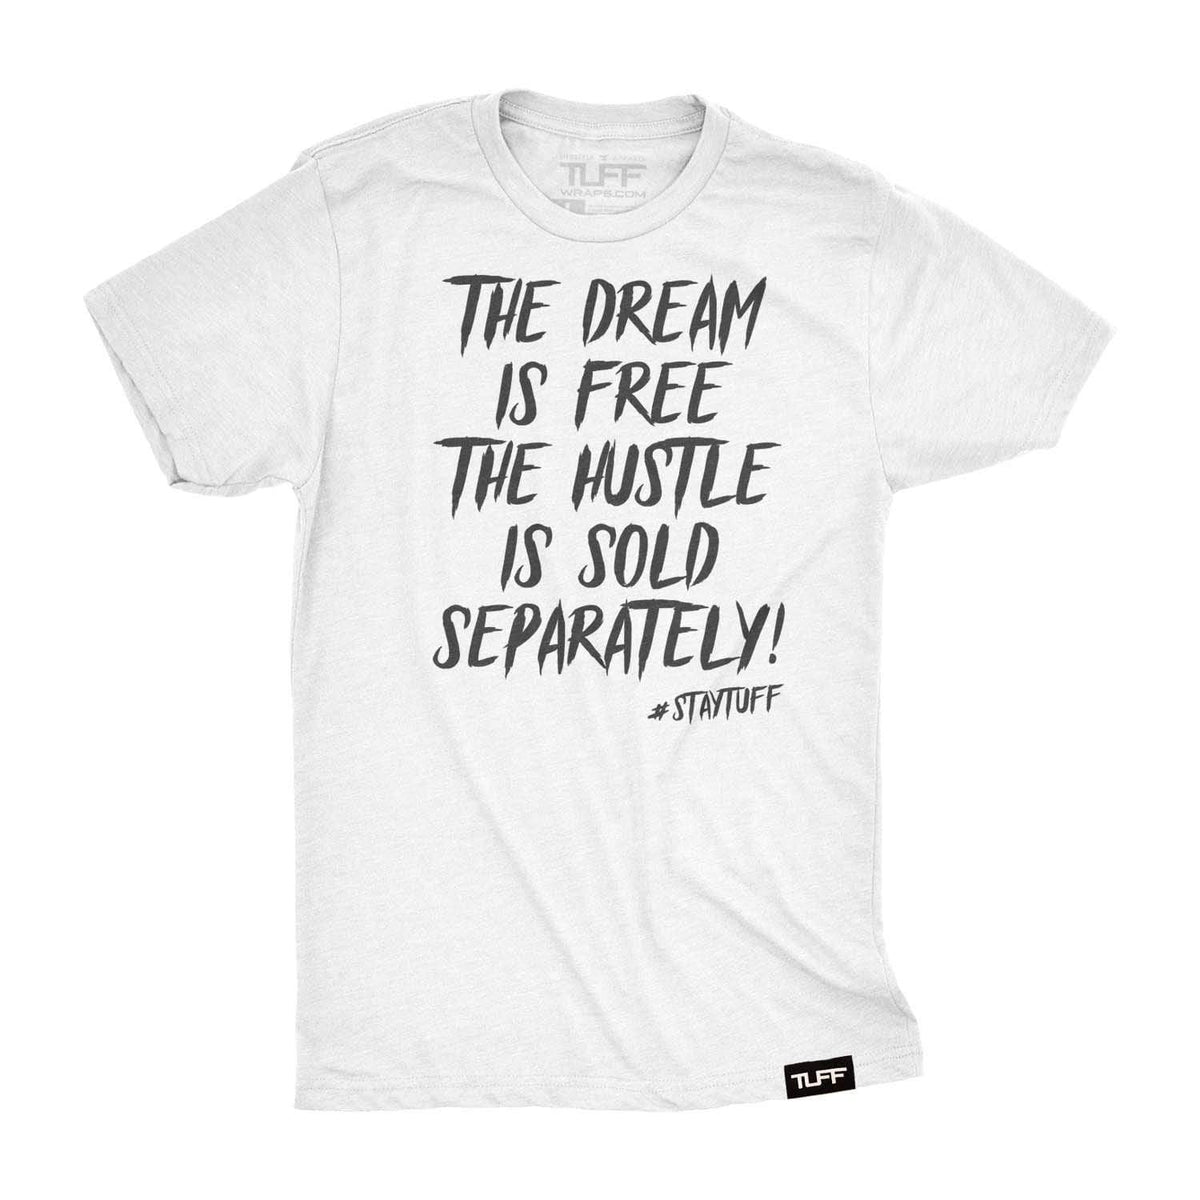 The Dream Is Free The Hustle Is Sold Separately Tee S / White TuffWraps.com